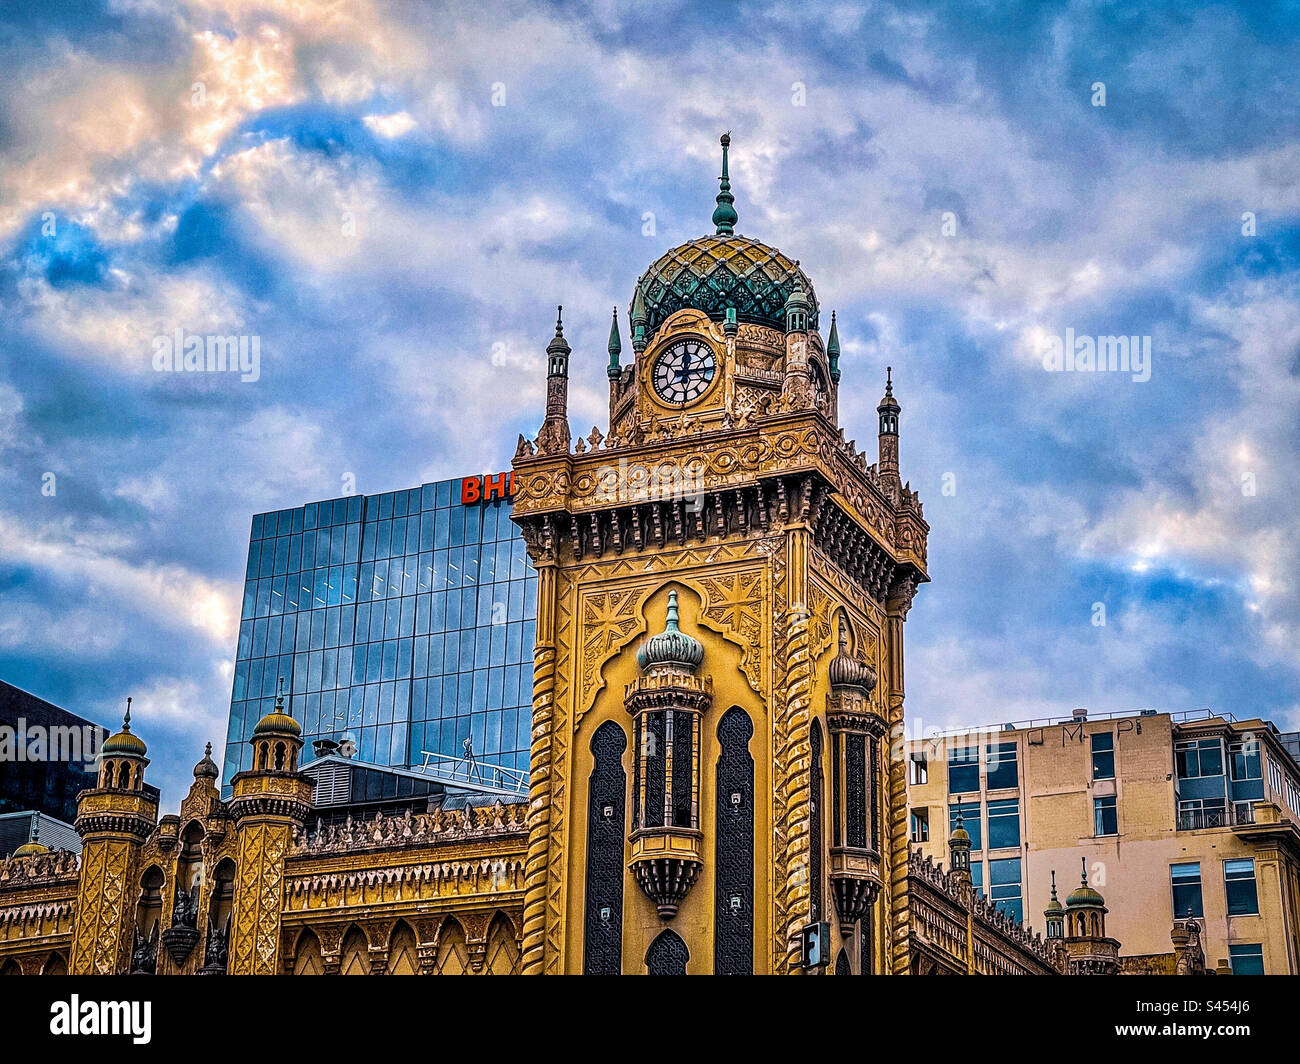 Low angle view of clock tower and minarets of The Forum theatre in Melbourne, Victoria, Australia against cloudy blue sky. Moorish revival architecture. Built in 1929. Heritage listed. Stock Photo